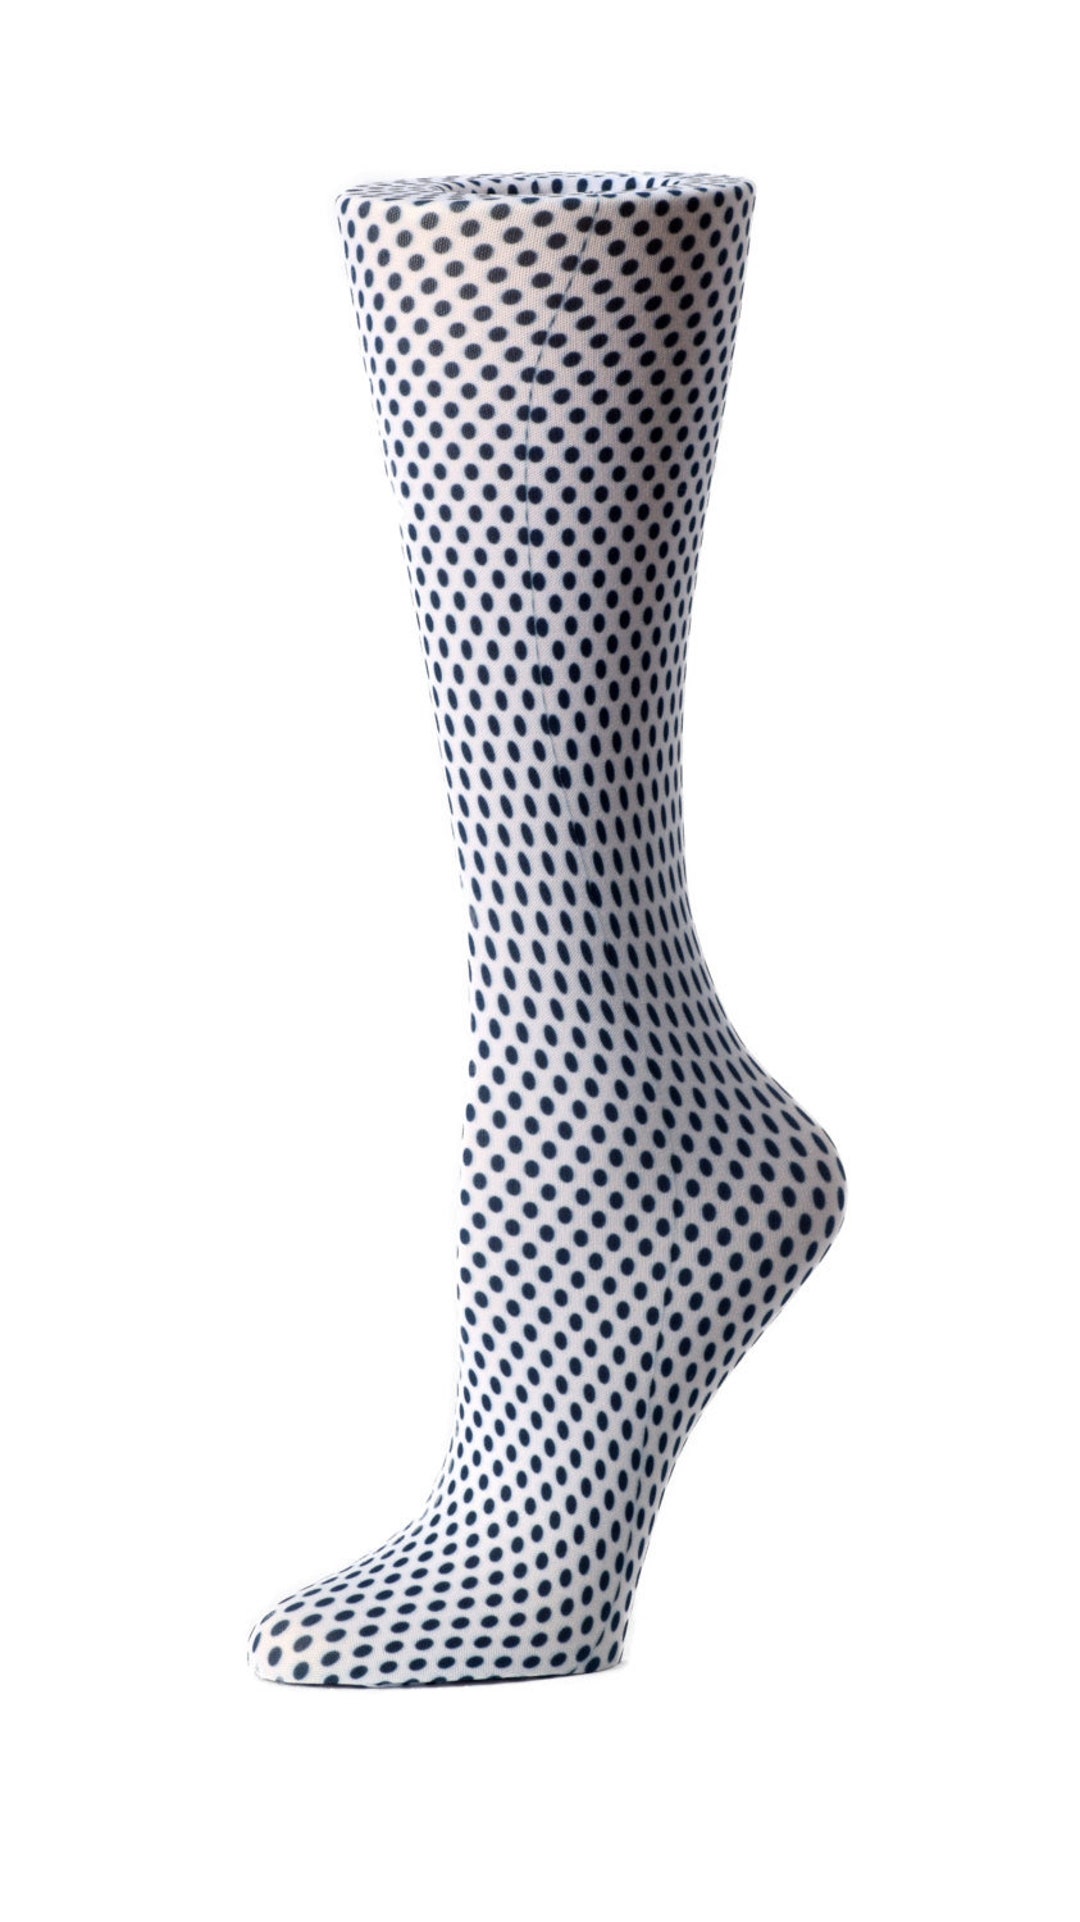 Cutieful Therapeutic Compression Socks Traditional Polka Dot - Etsy